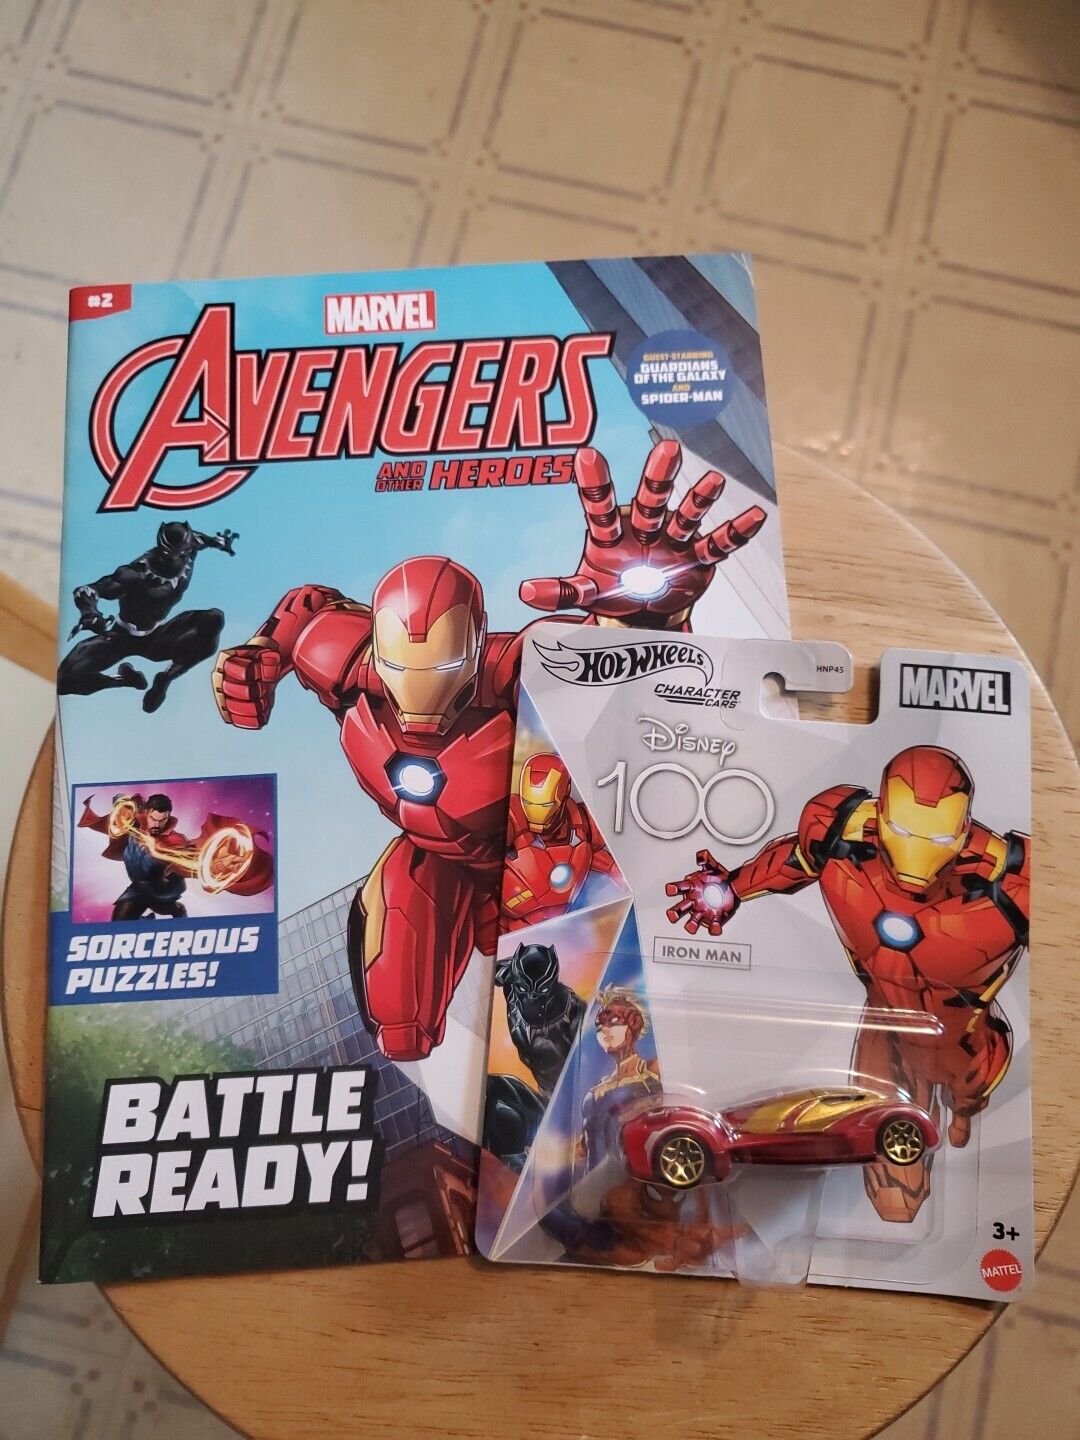 Marvel Avengers & Other Heroes Magazine and Activity Book #2 & Iron Man Car New